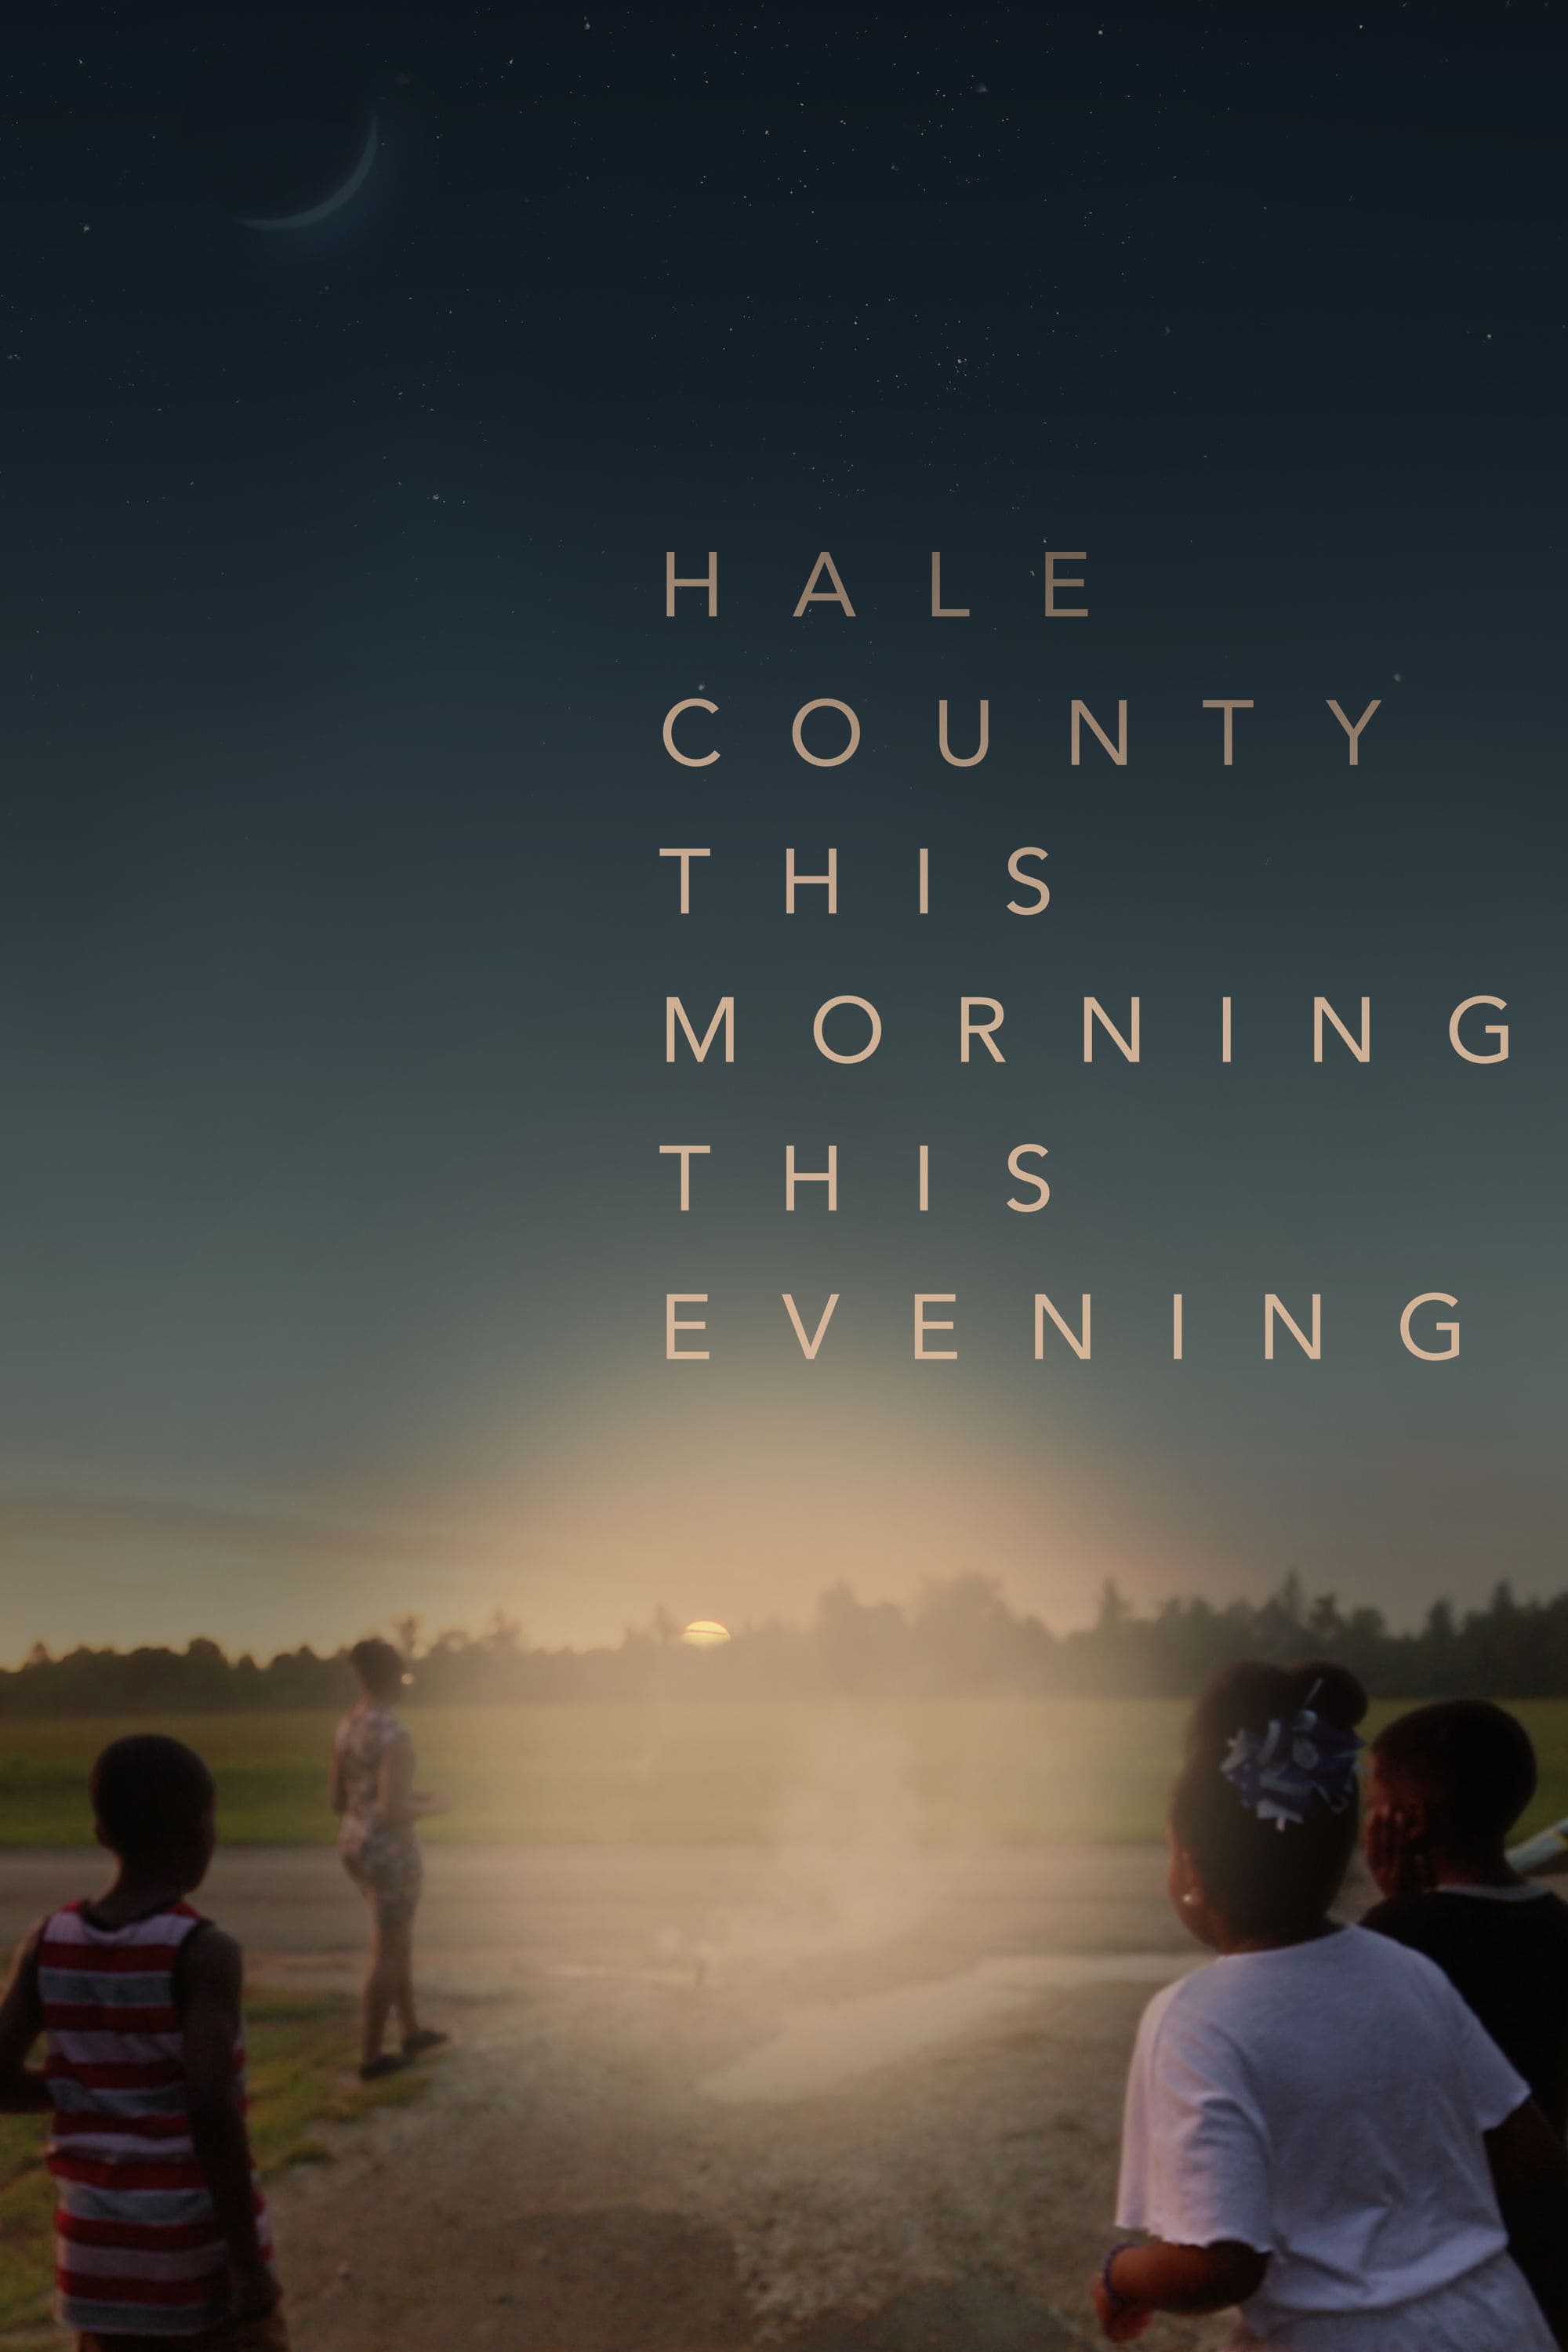 Caratula de Hale County This Morning, This Evening (Hale County This Morning, This Evening) 